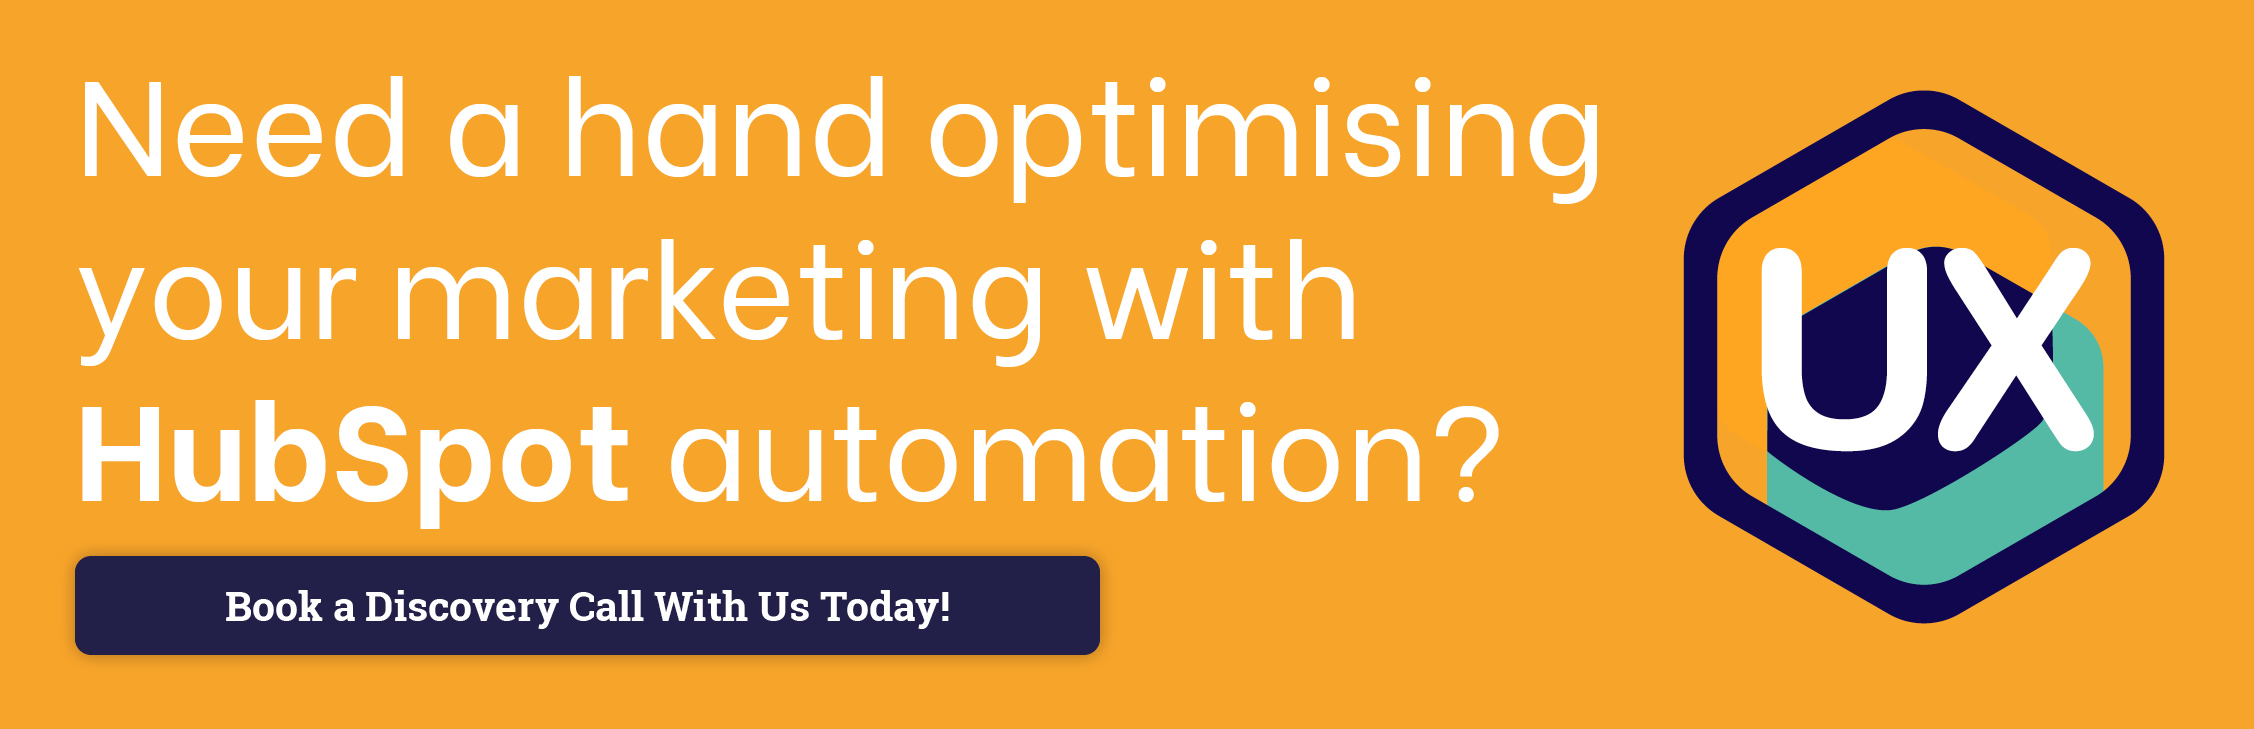 Need a hand optimising your marketing with HubSpot automation? Book a Discovery Call Today!